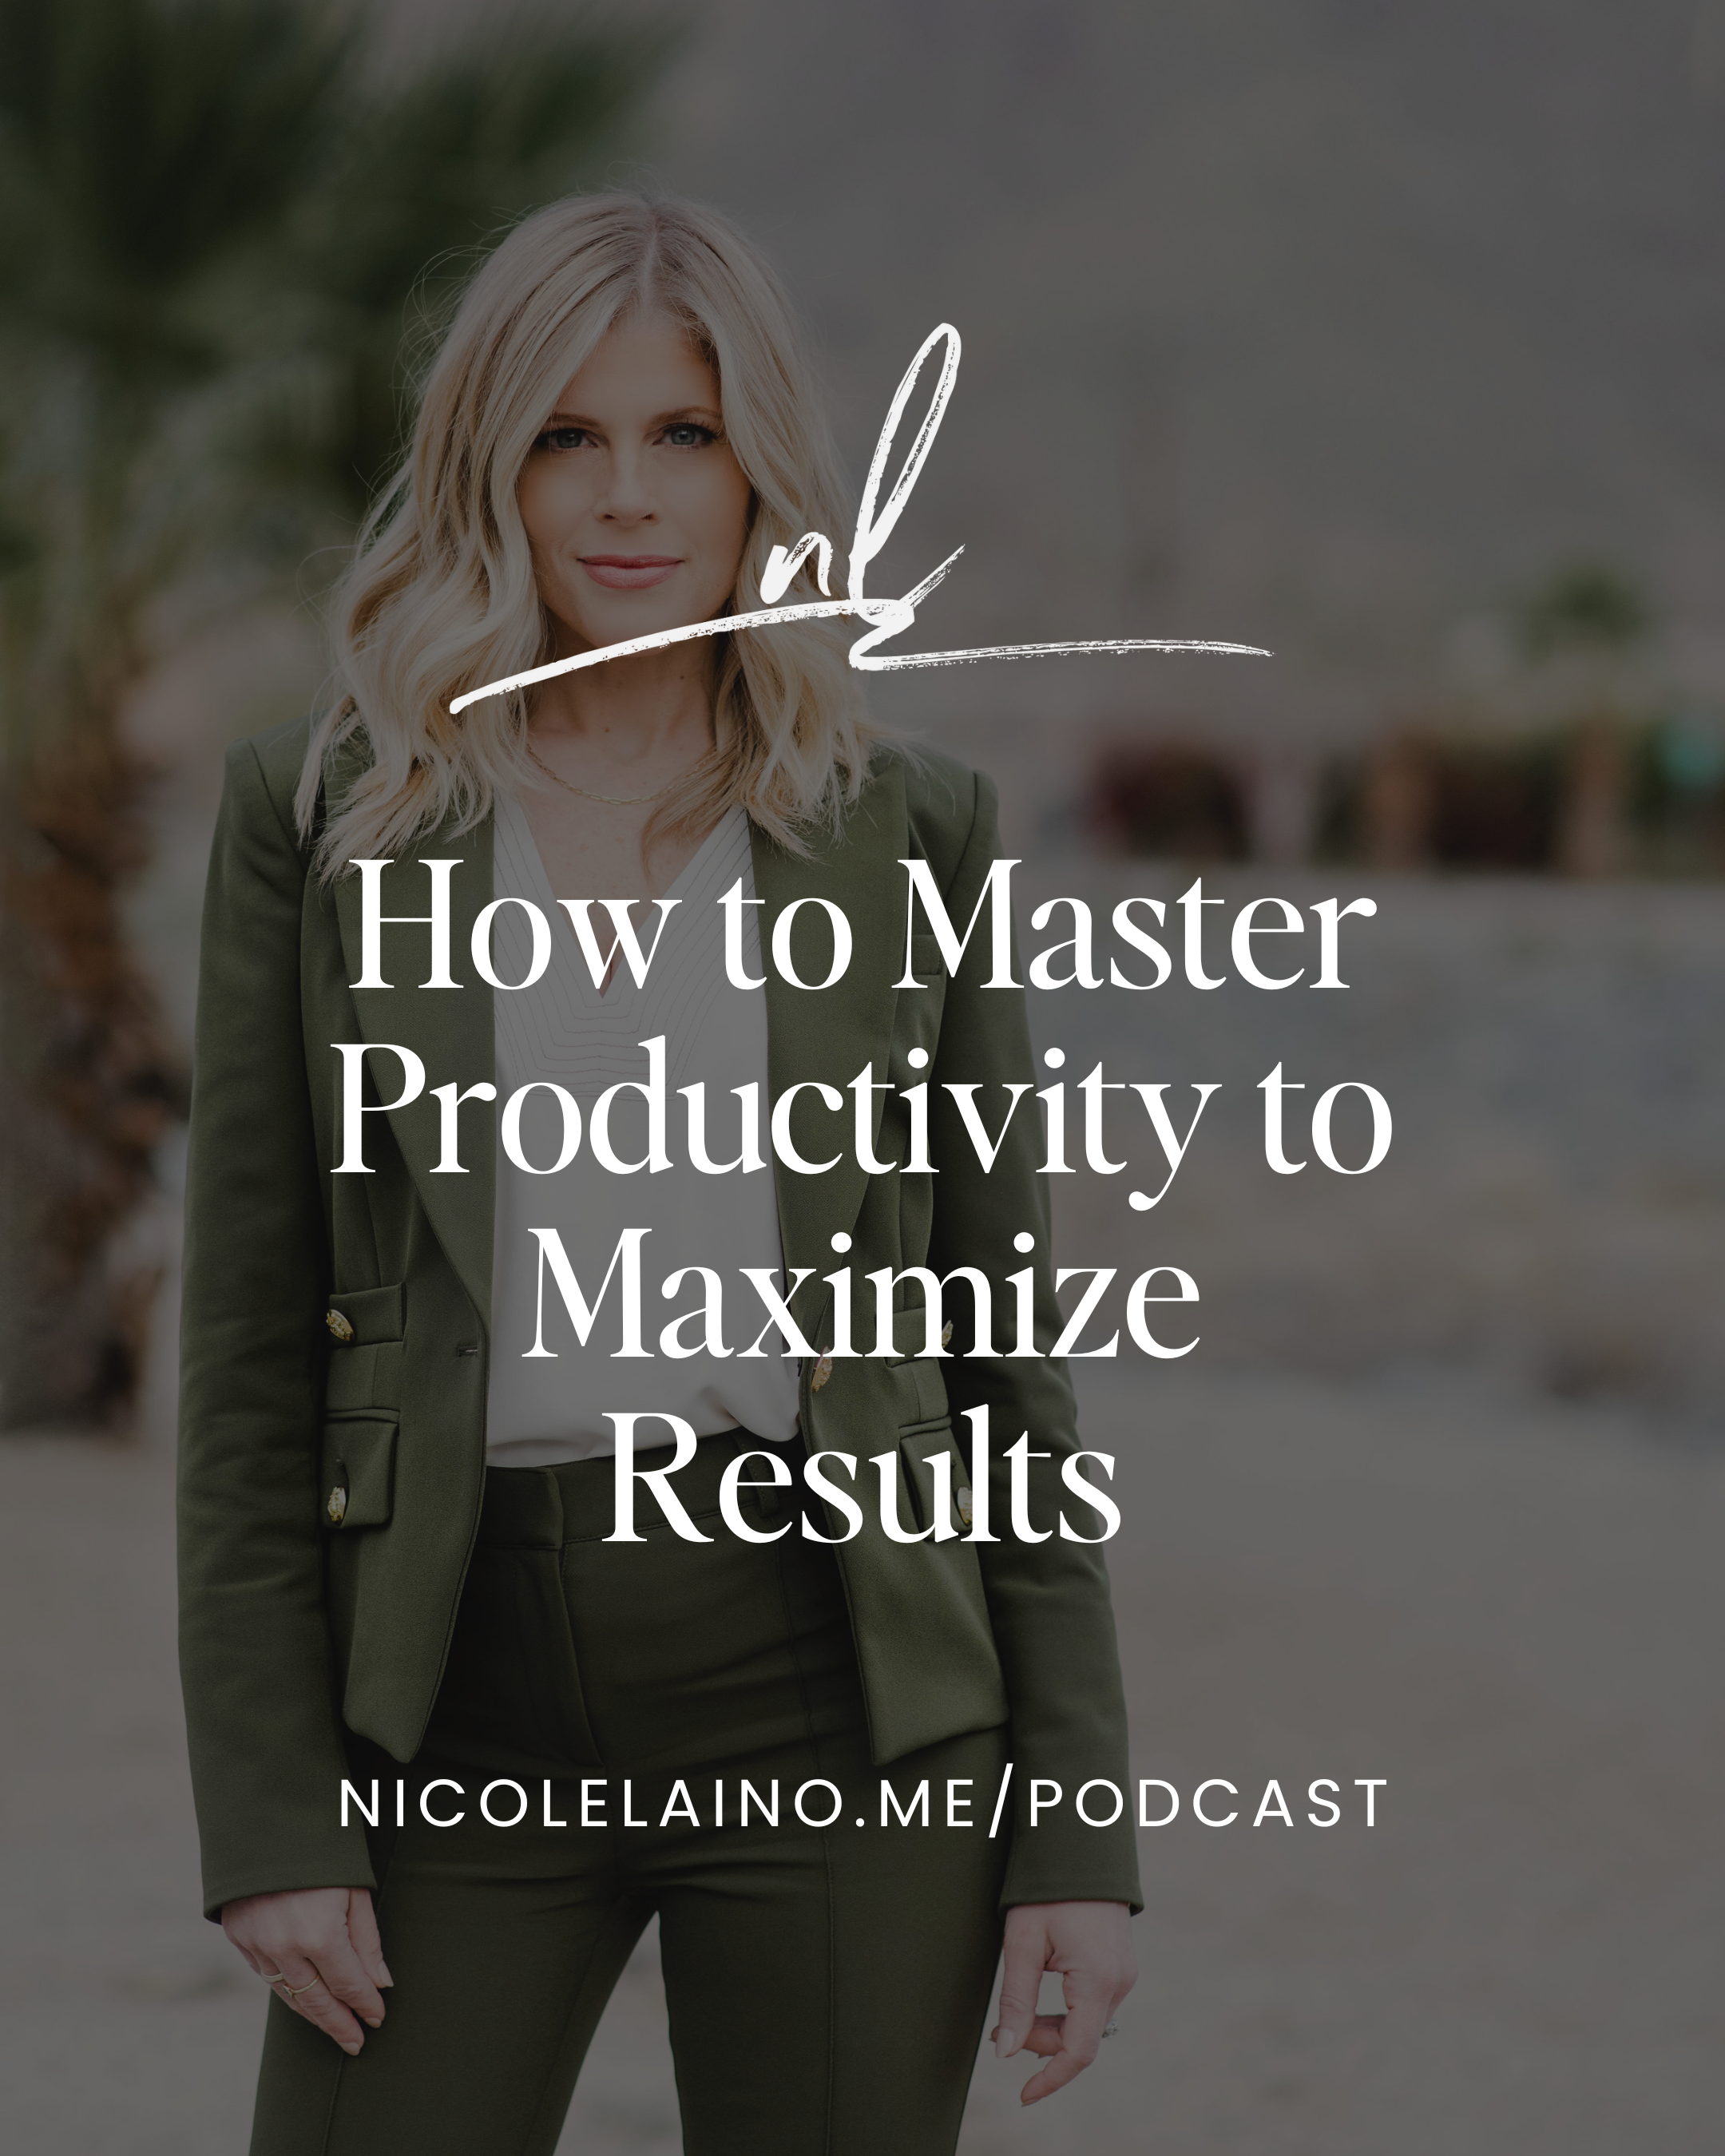 How to Master Productivity to Maximize Results